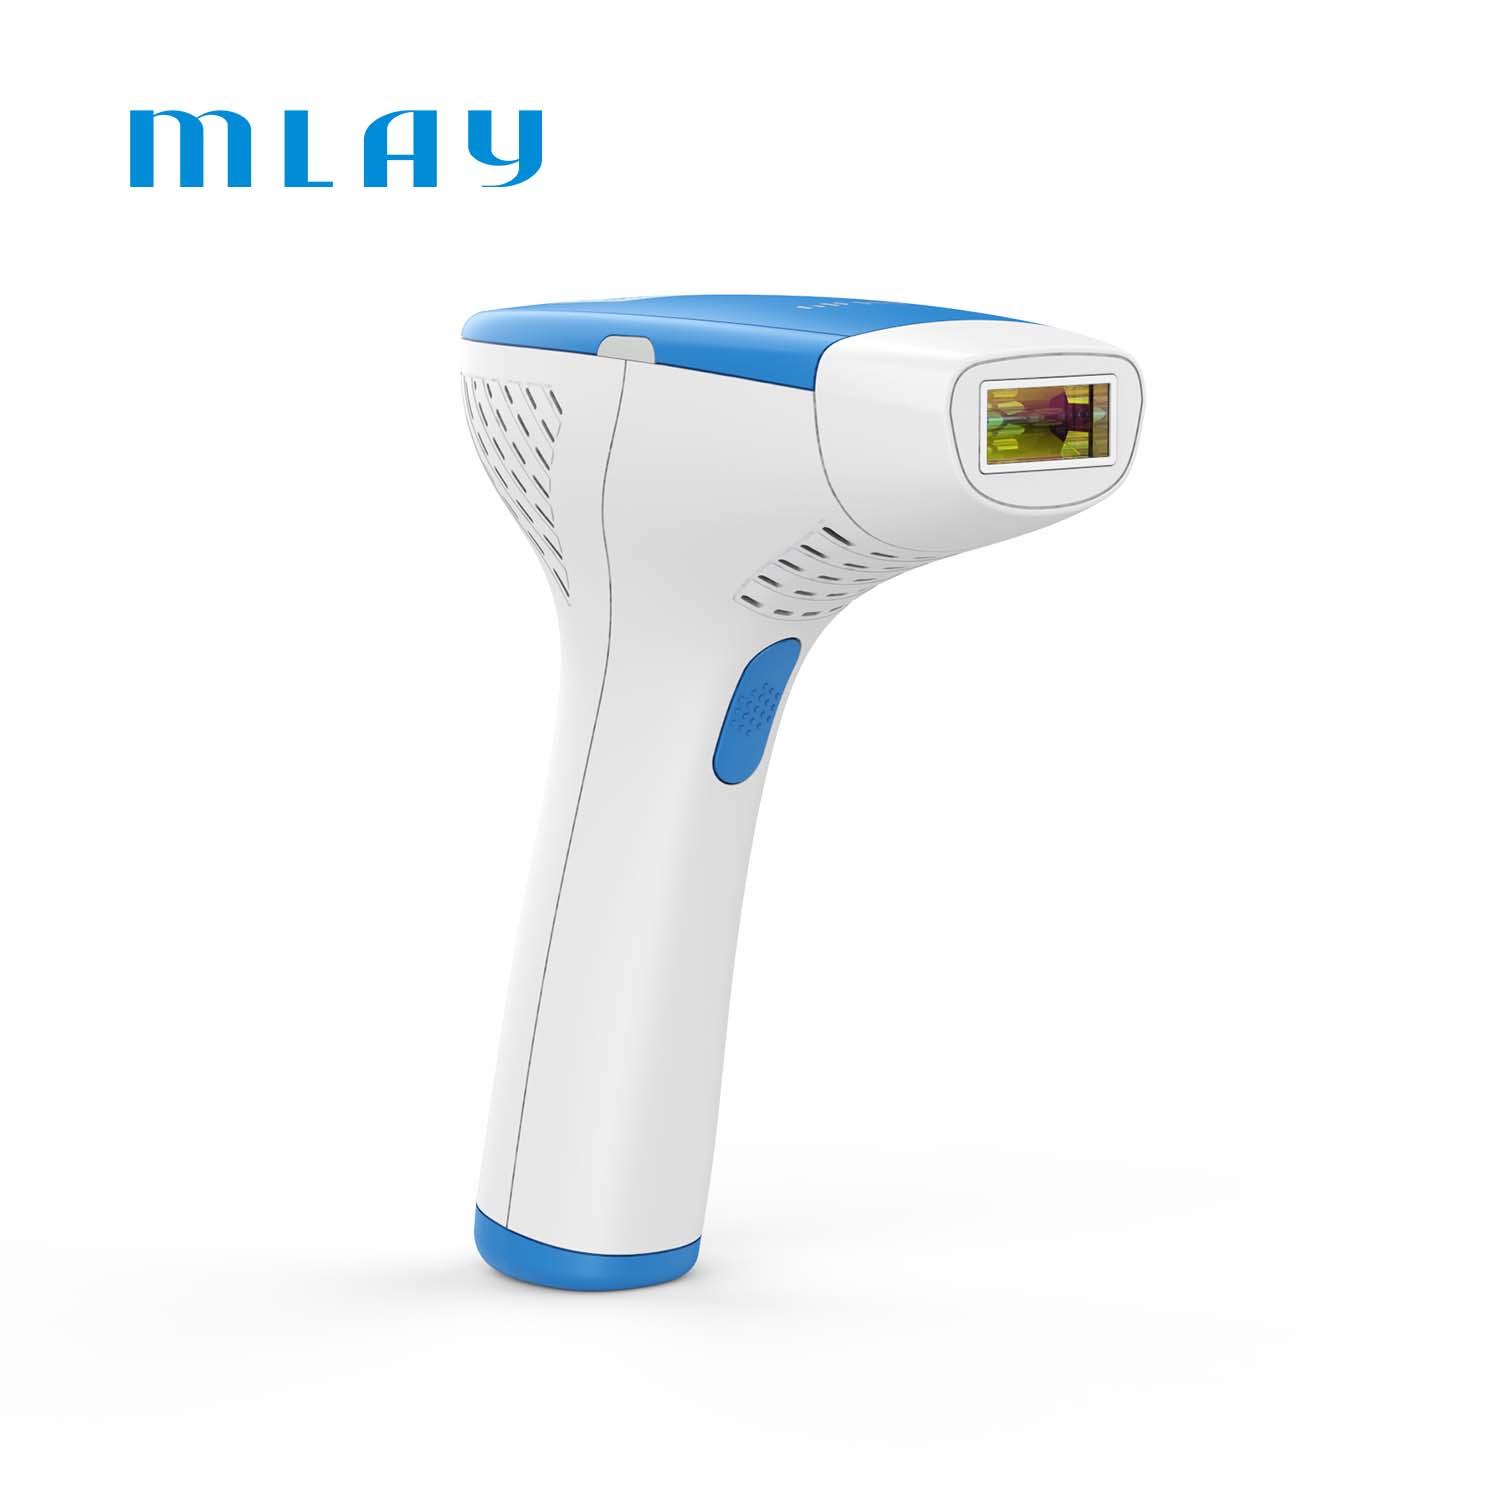 Multi Function Personal Care Beauty Machine Plug-in Painless IPL Hair Removal For Home Use